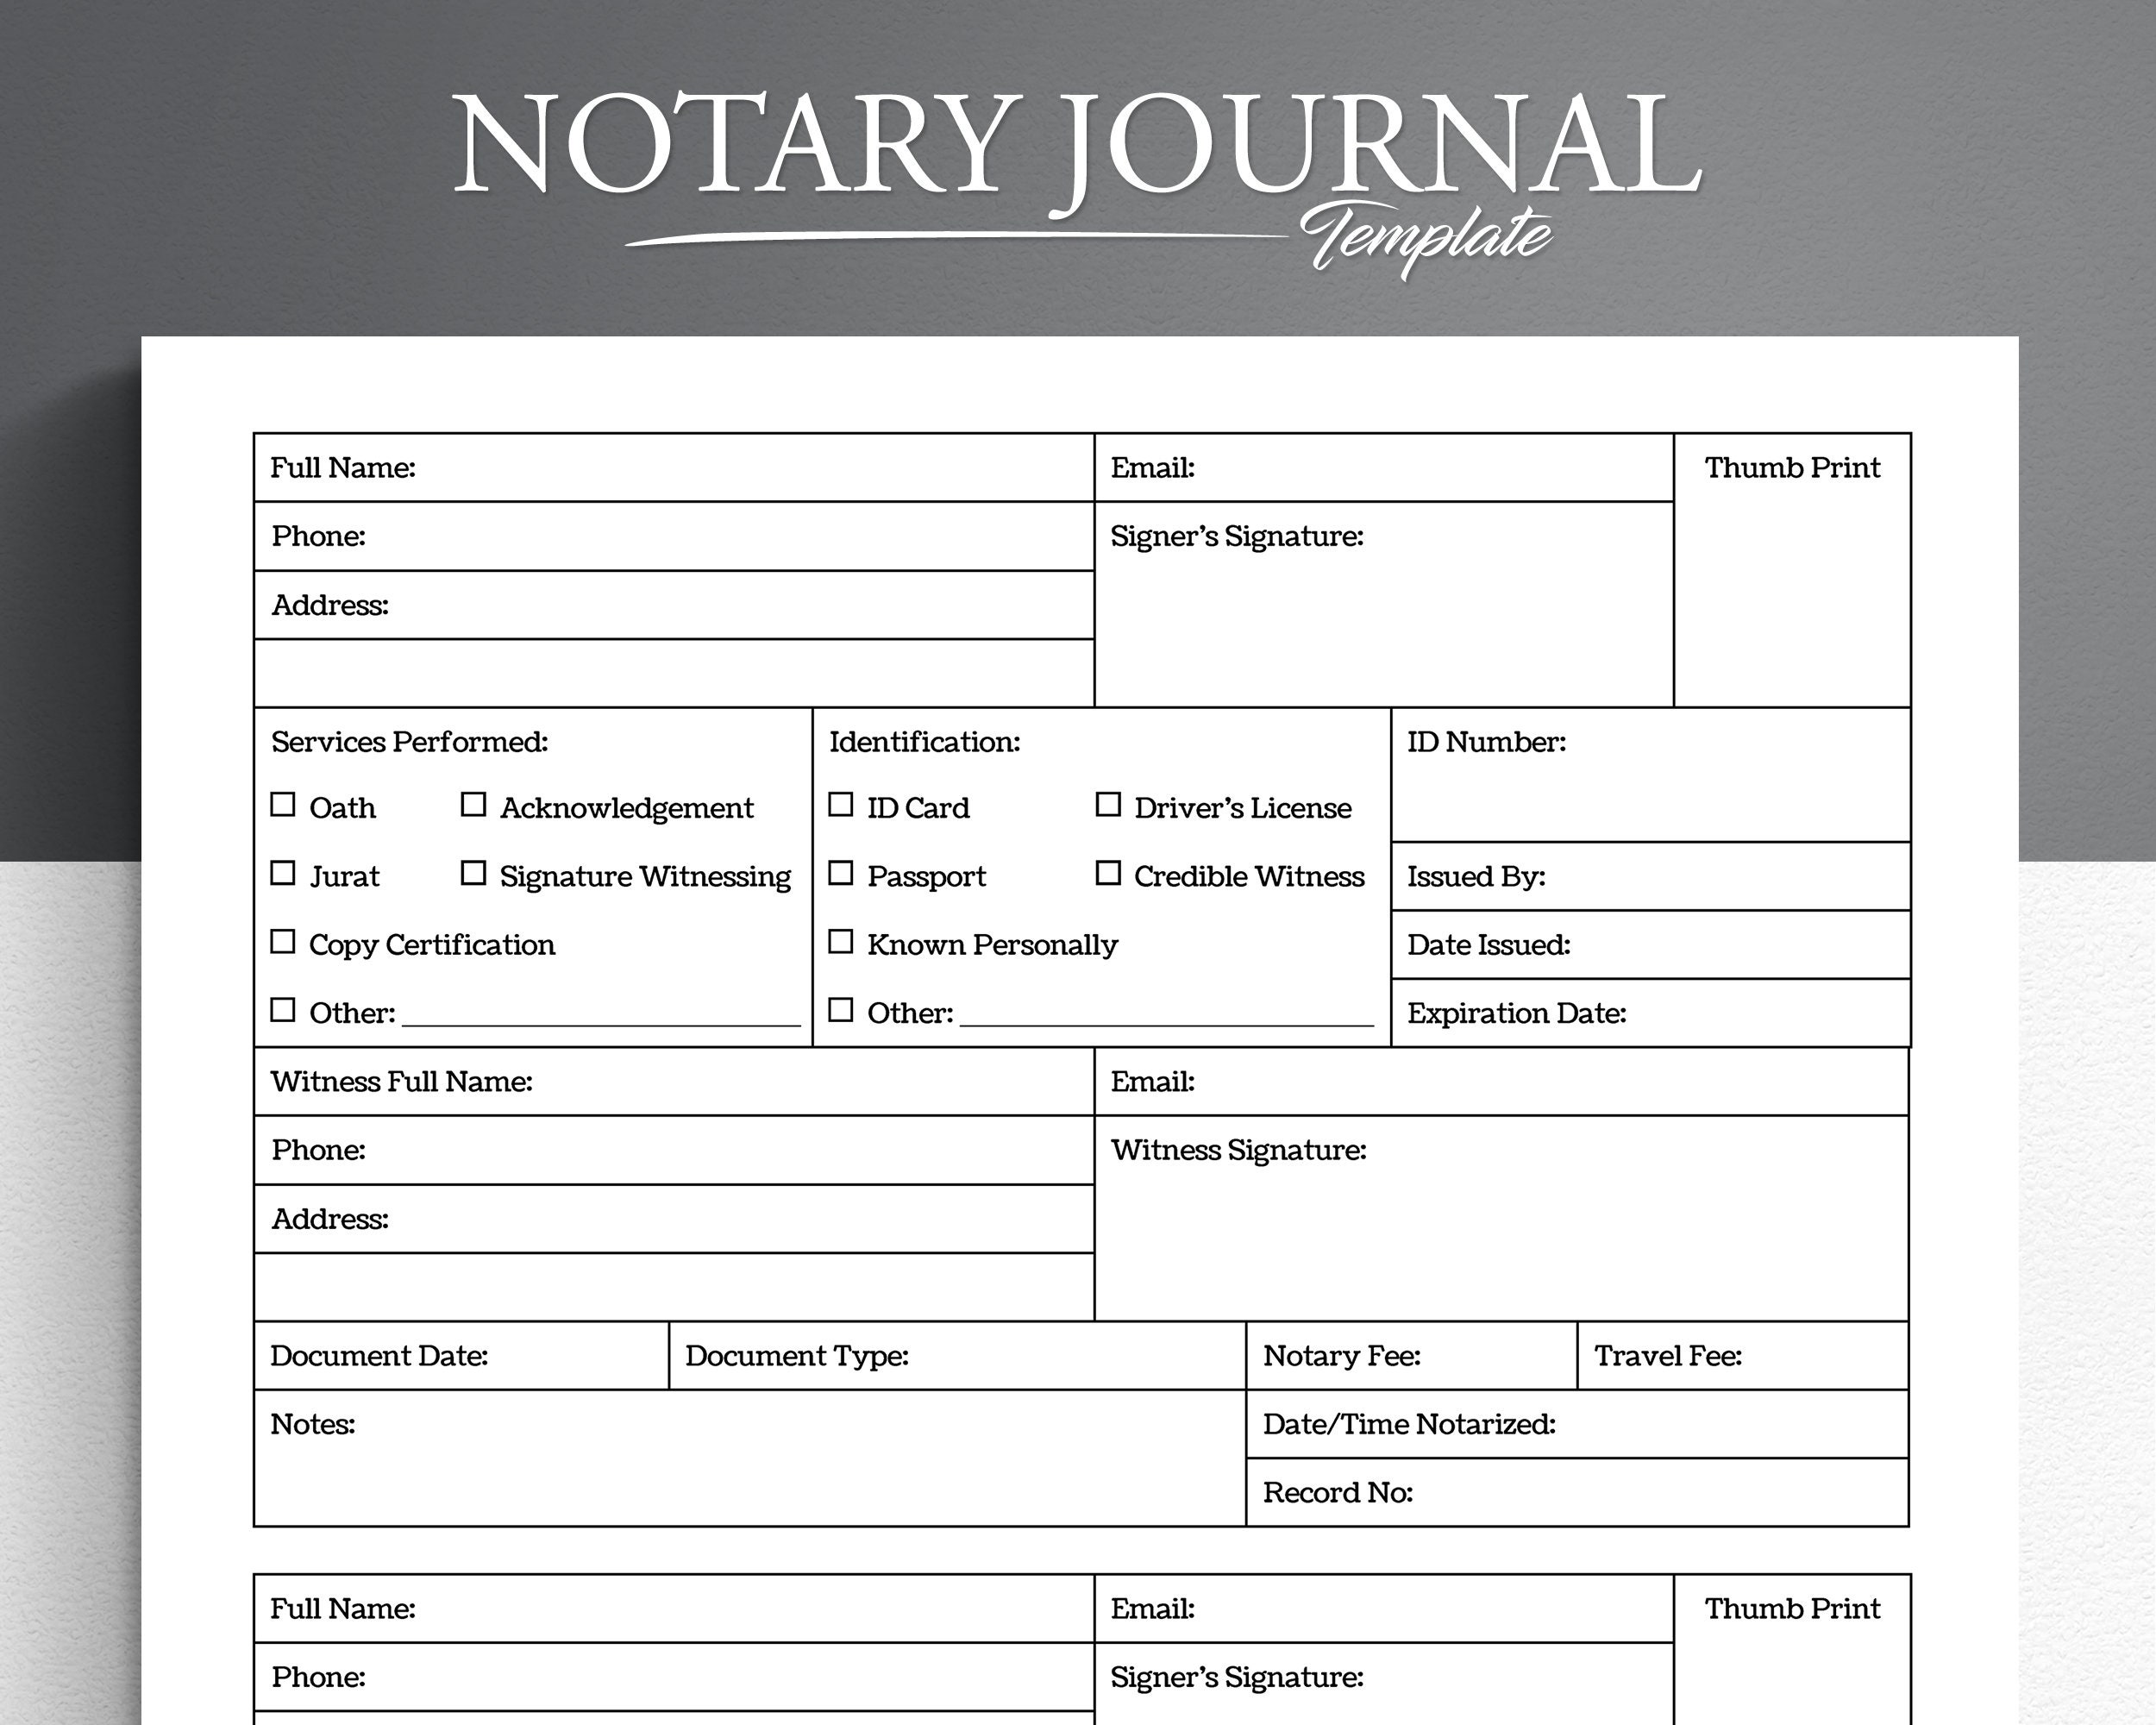 printable-notary-journal-notary-log-notary-book-printable-etsy